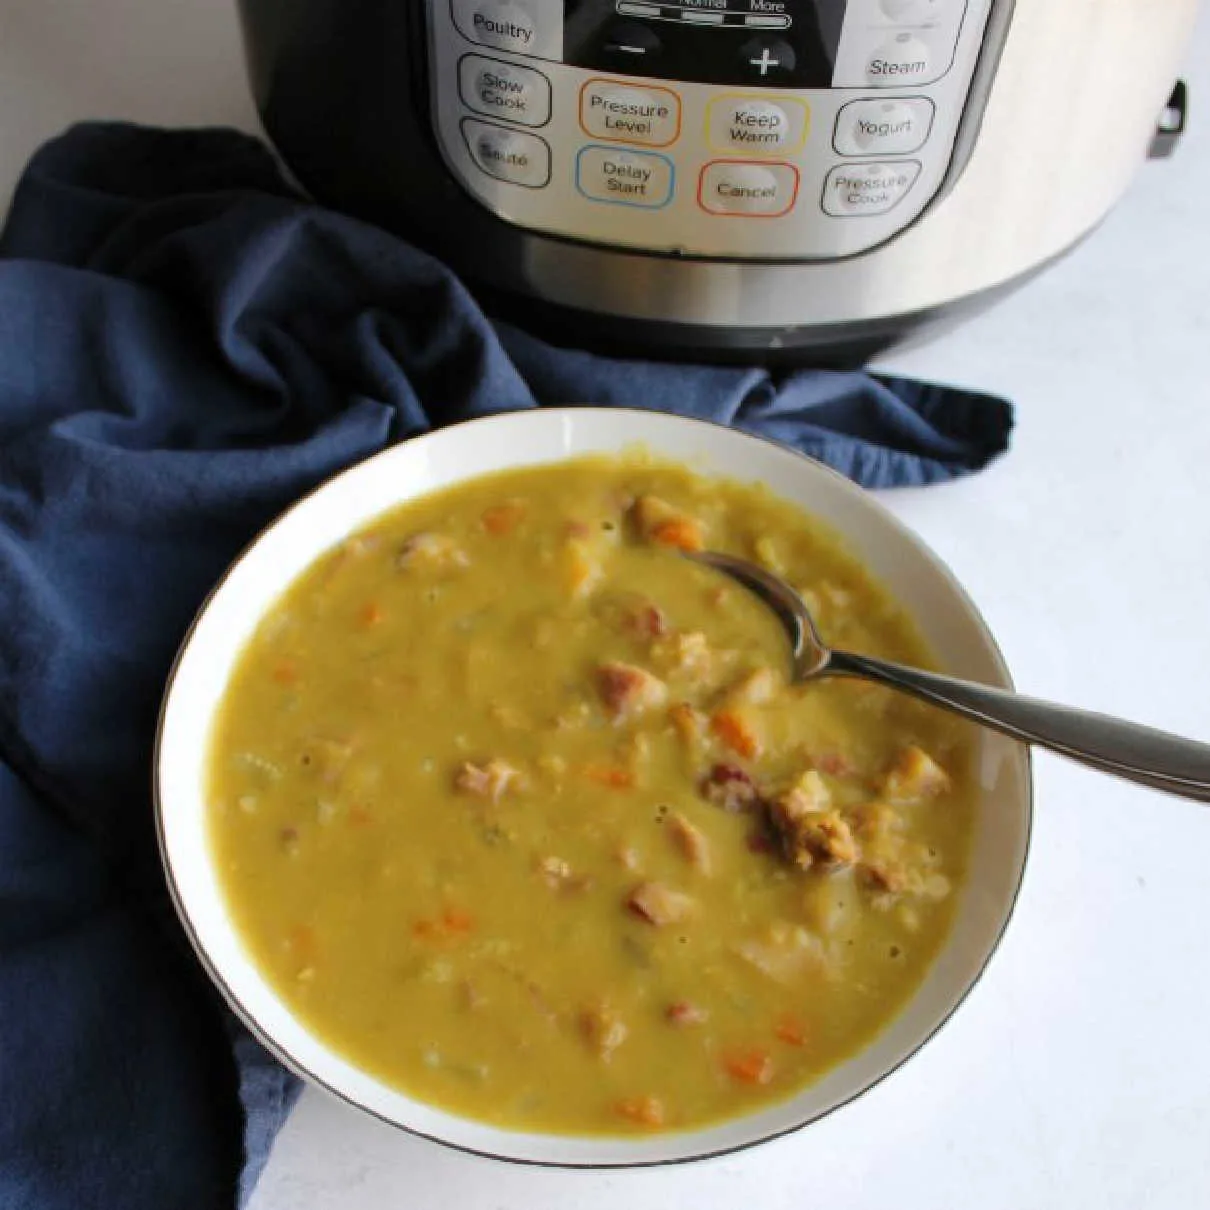 Bowl of thick split pea soup with carrots and ham in front of instant pot it was cooked in.